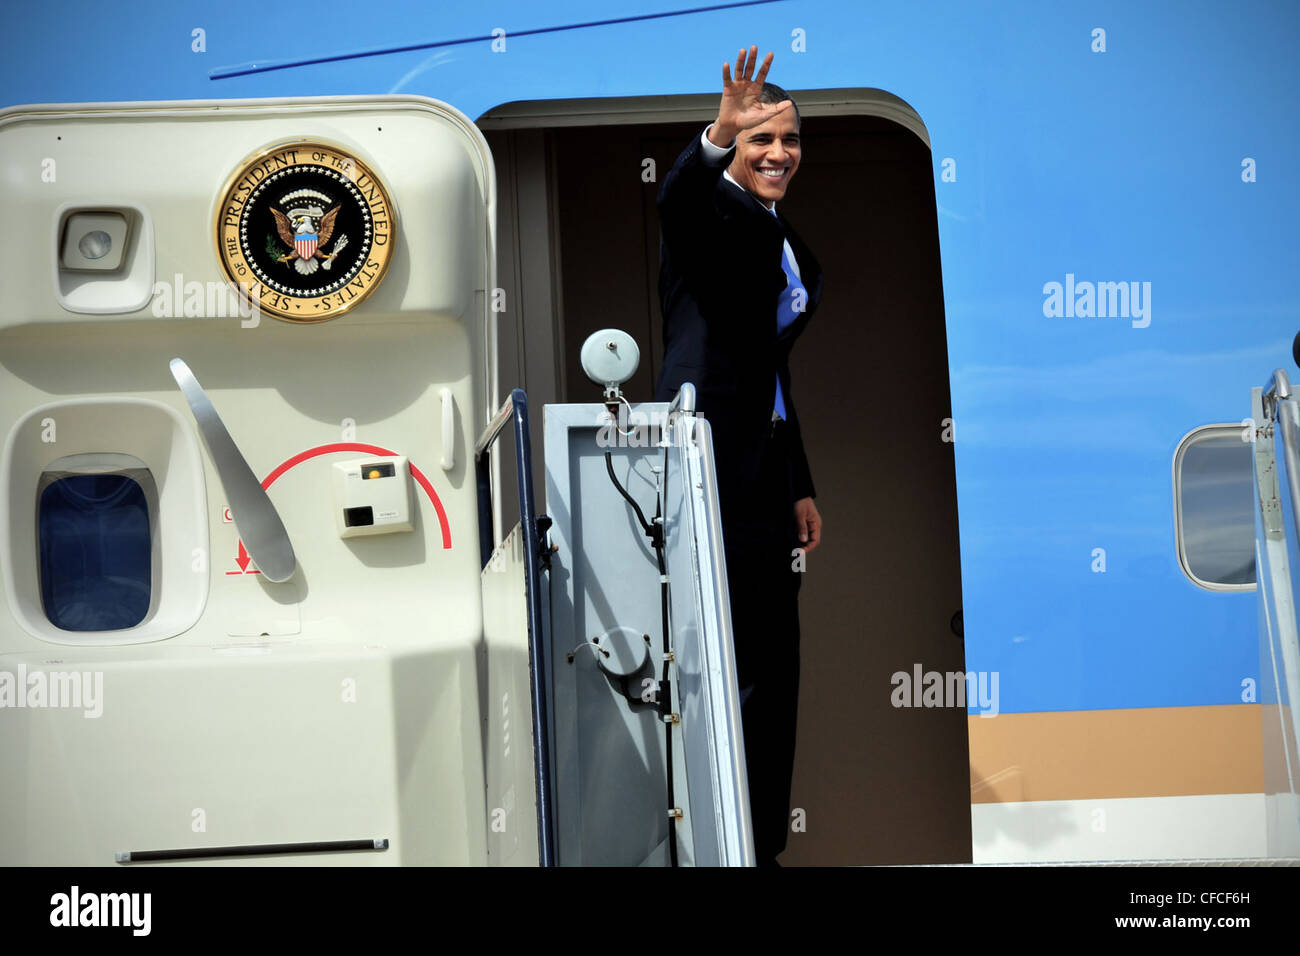 Charlotte, N.C. -- President Obama waves from Air Force One before departing Charlotte Douglas International Airport. The President was visiting a business in the local town of Mt. Holly, N.C. Stock Photo